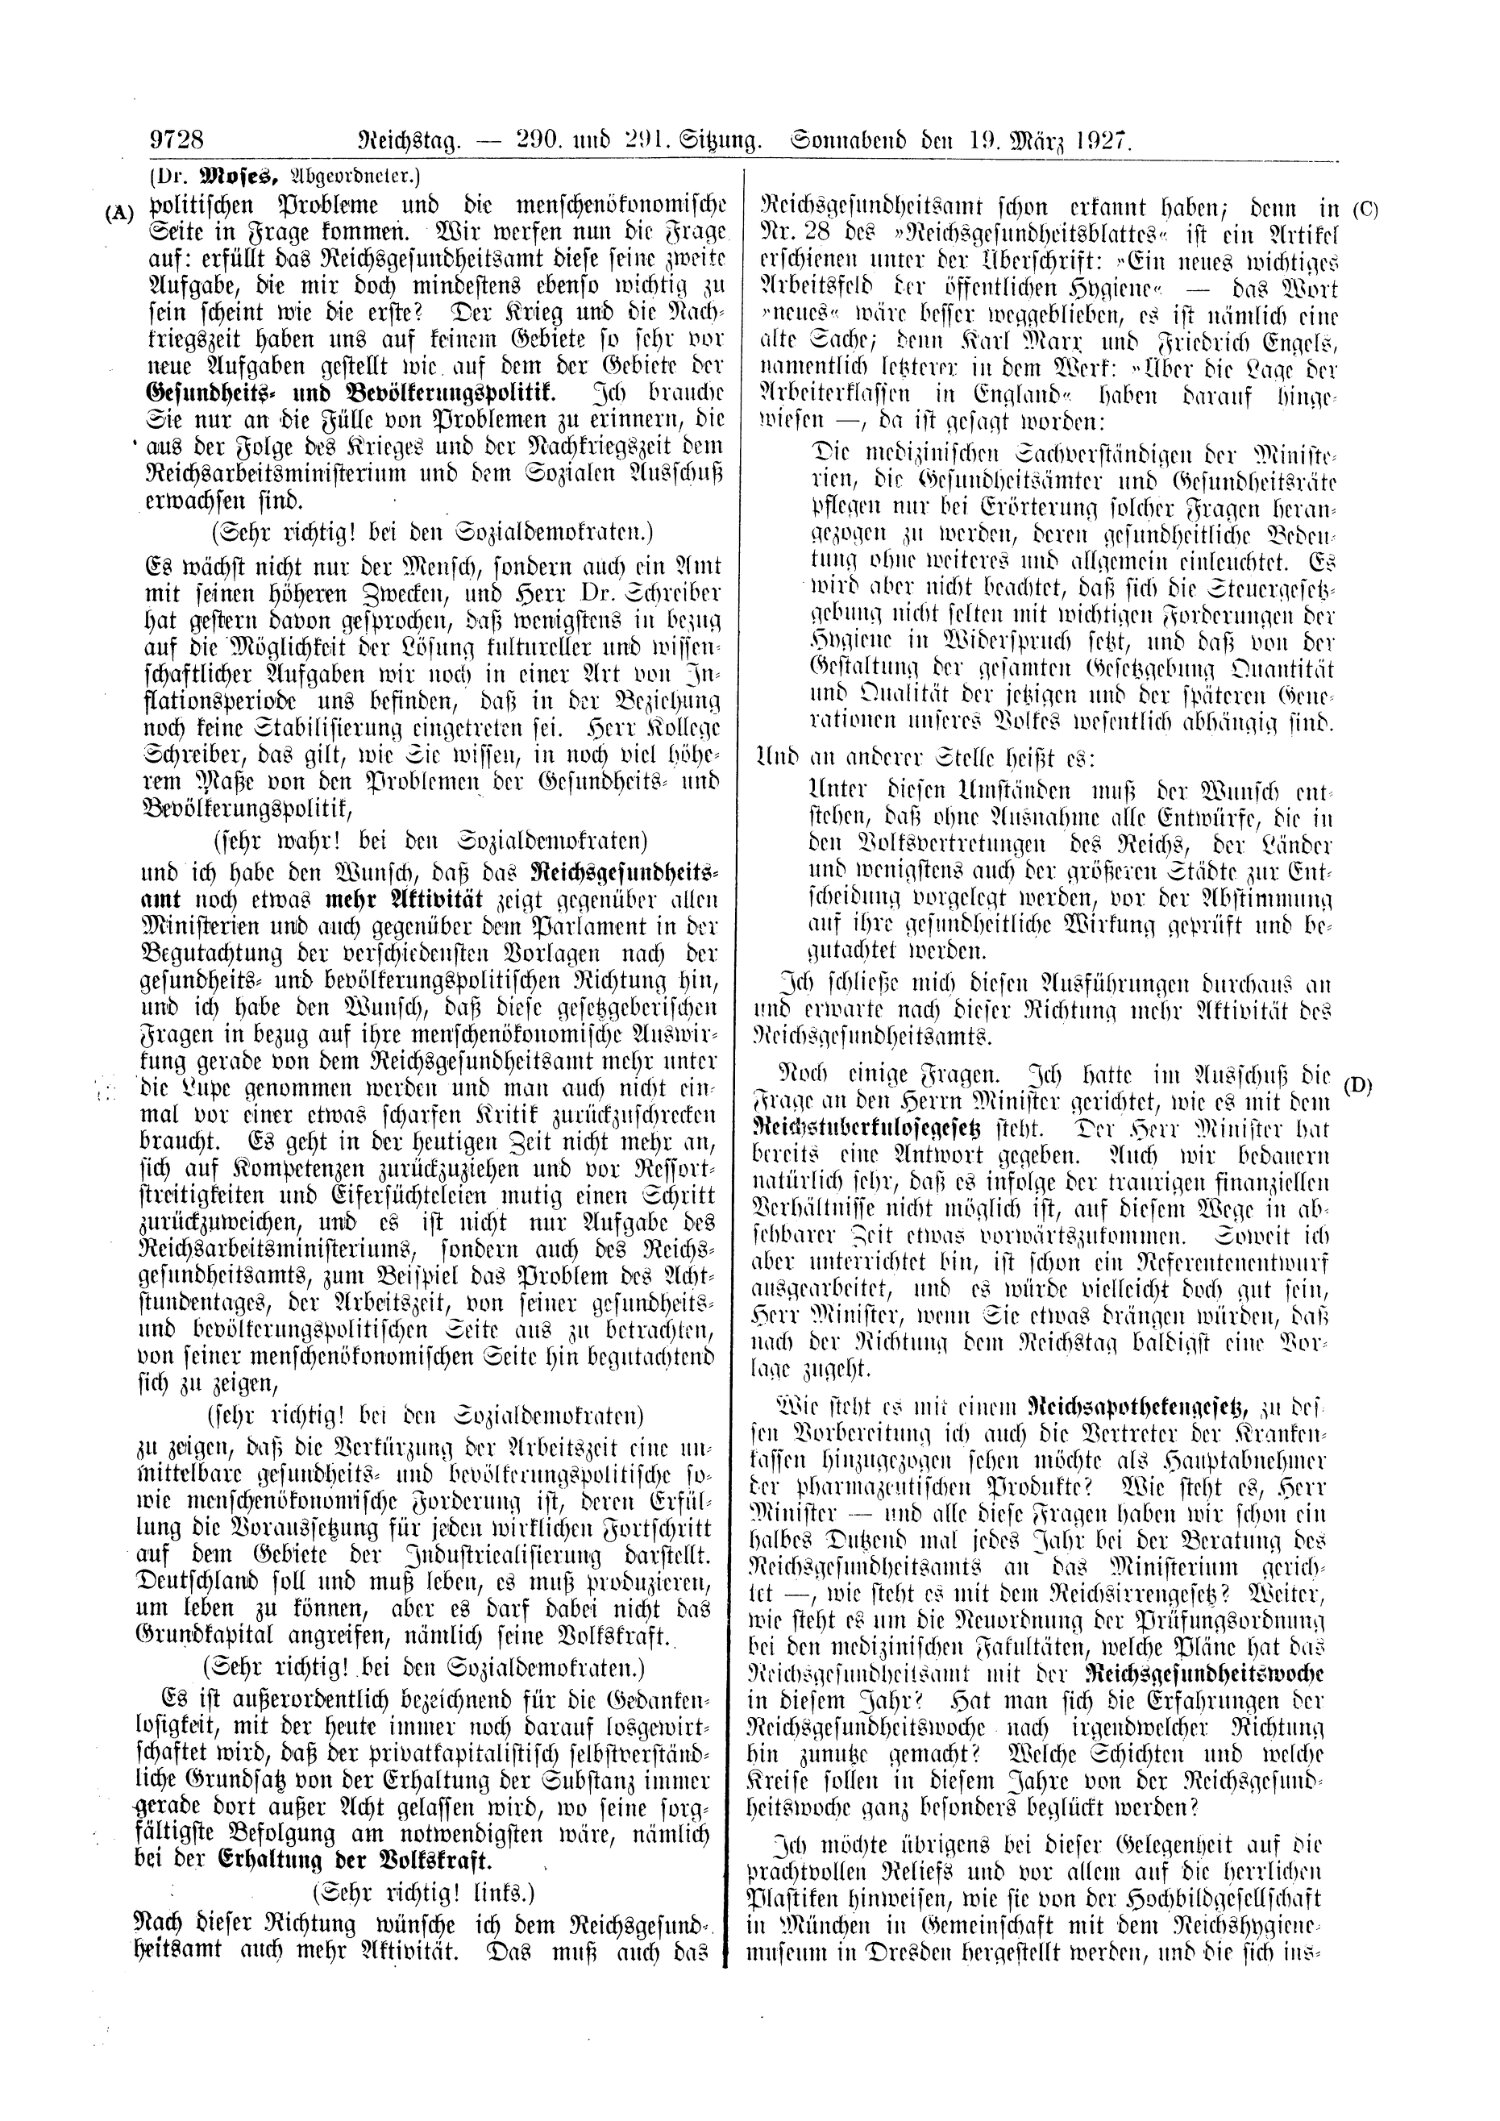 Scan of page 9728